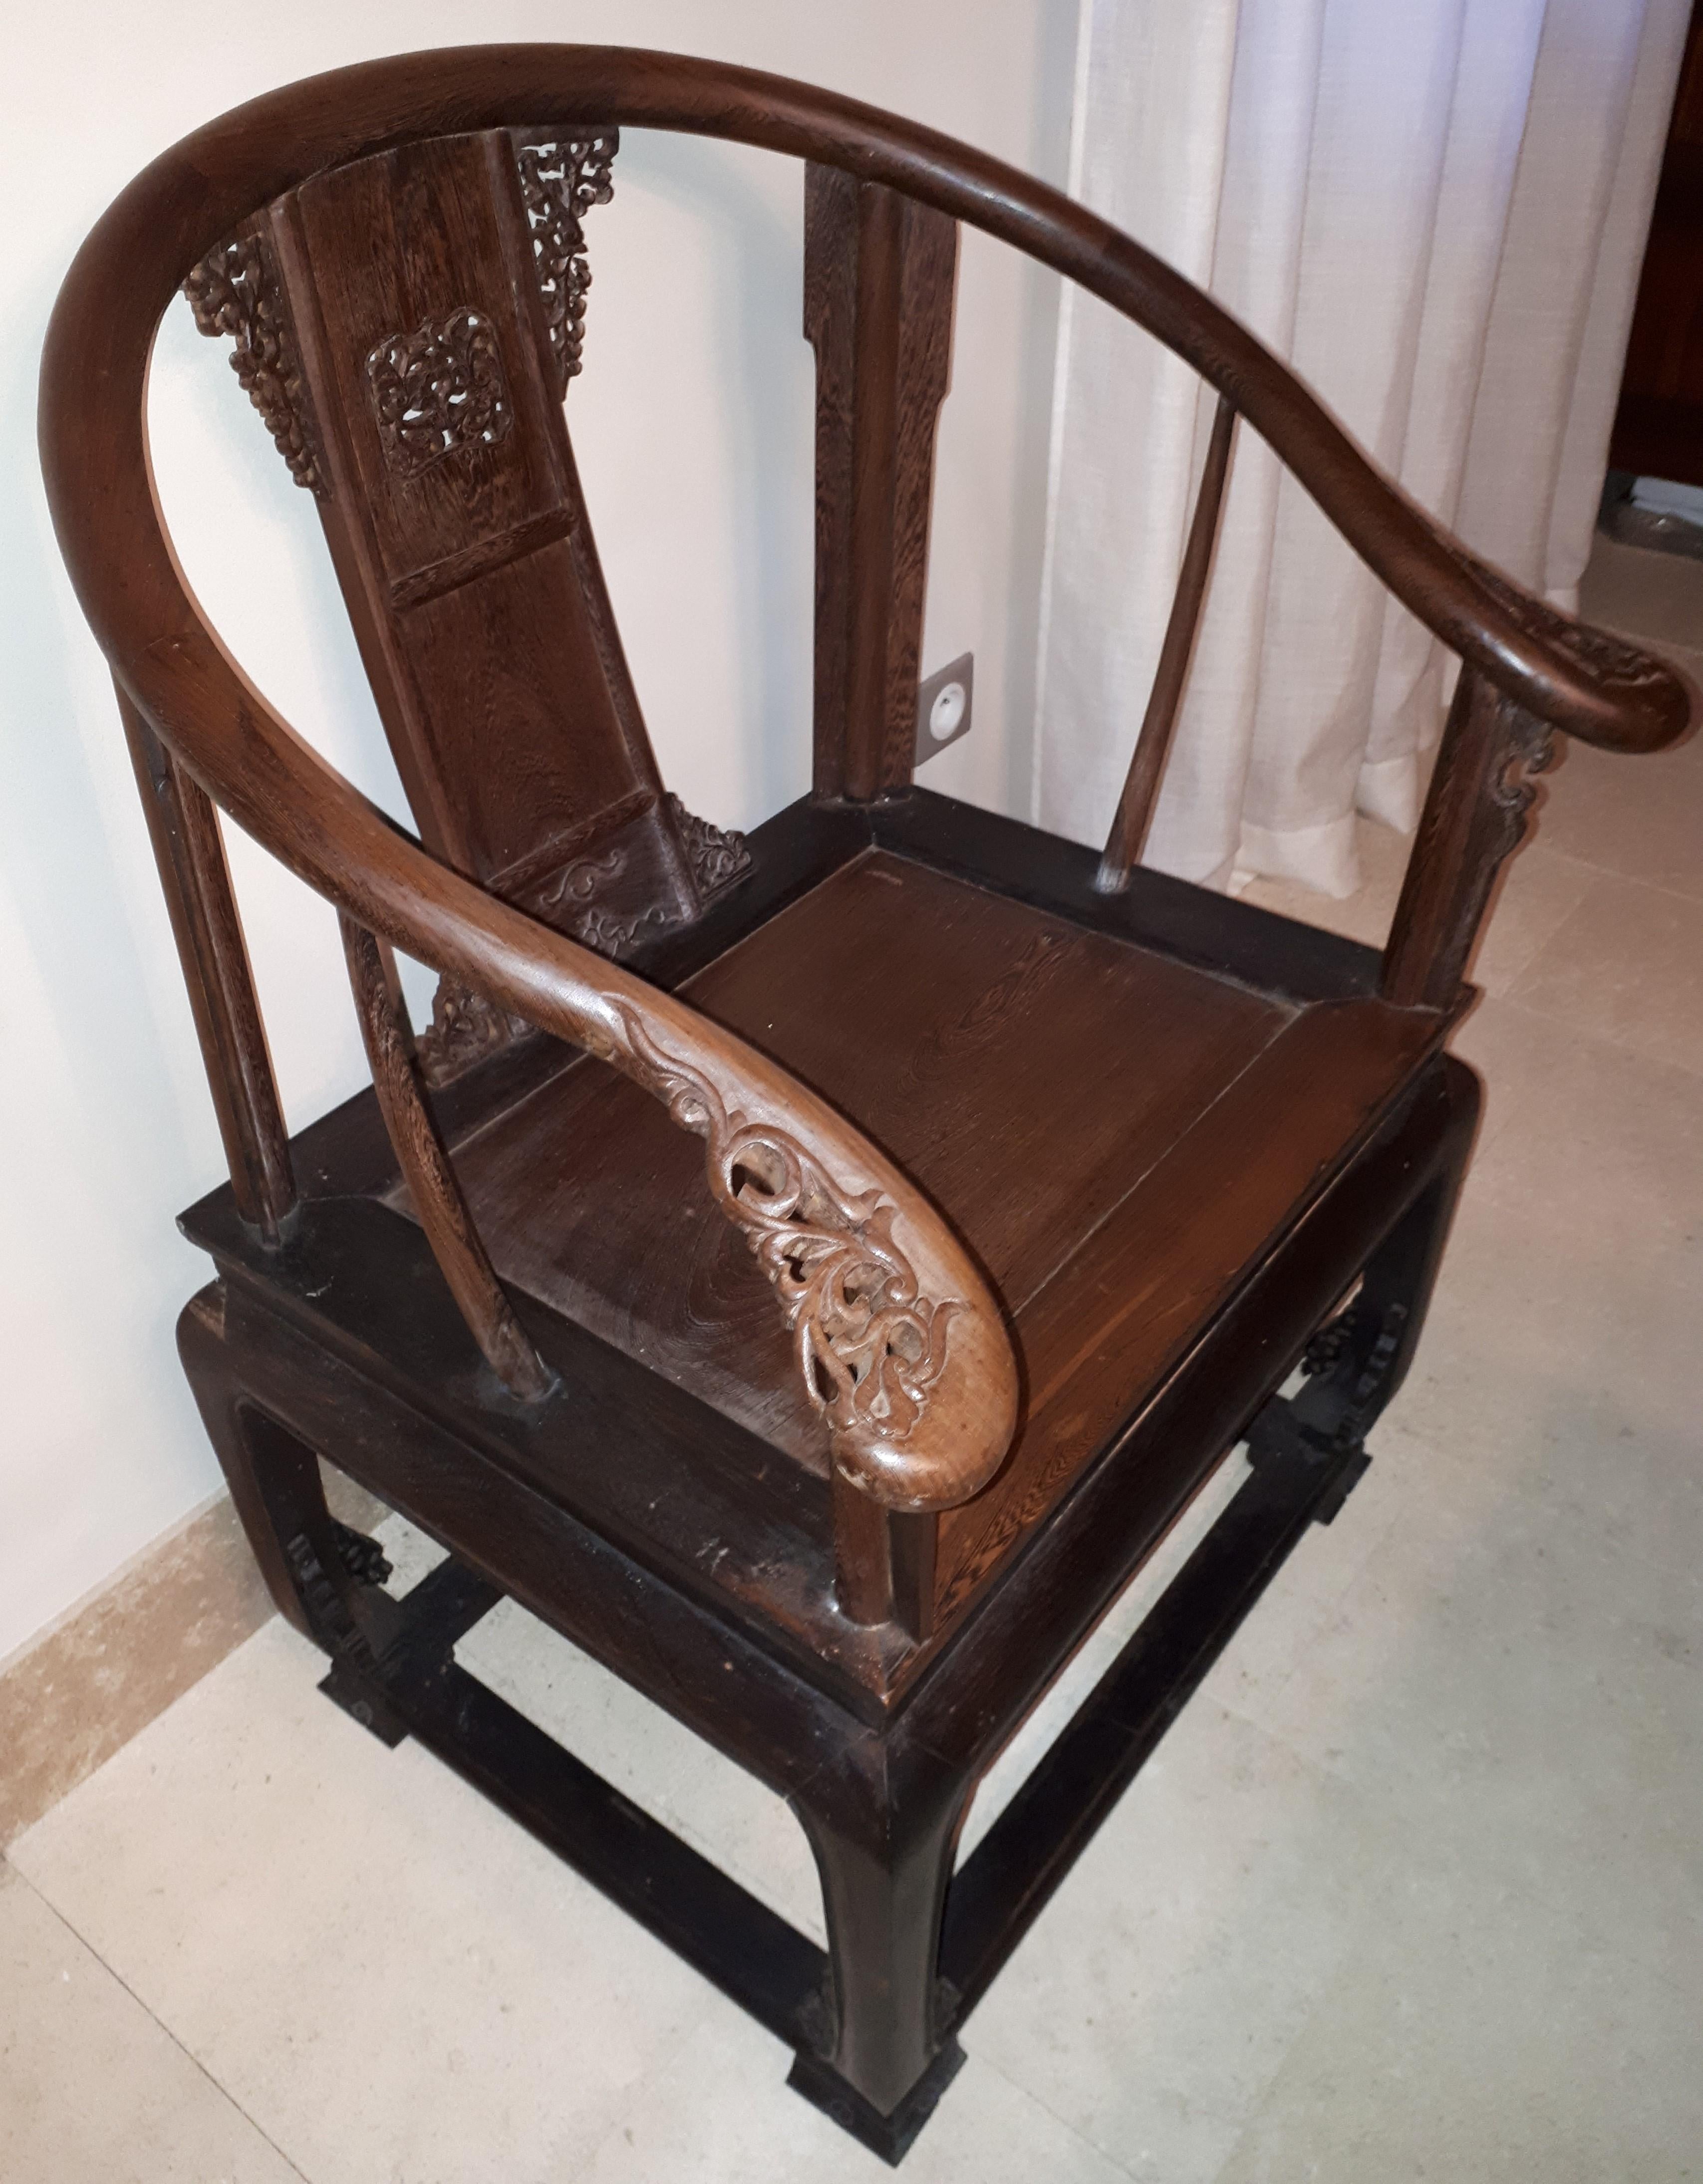 Majestic quanyi-type armchair in jichimu, with a rounded horseshoe-shaped backrest. The armchair is openworked and sculpted with finesse in many places. This chair is perfectly functional.
China, 19th century.